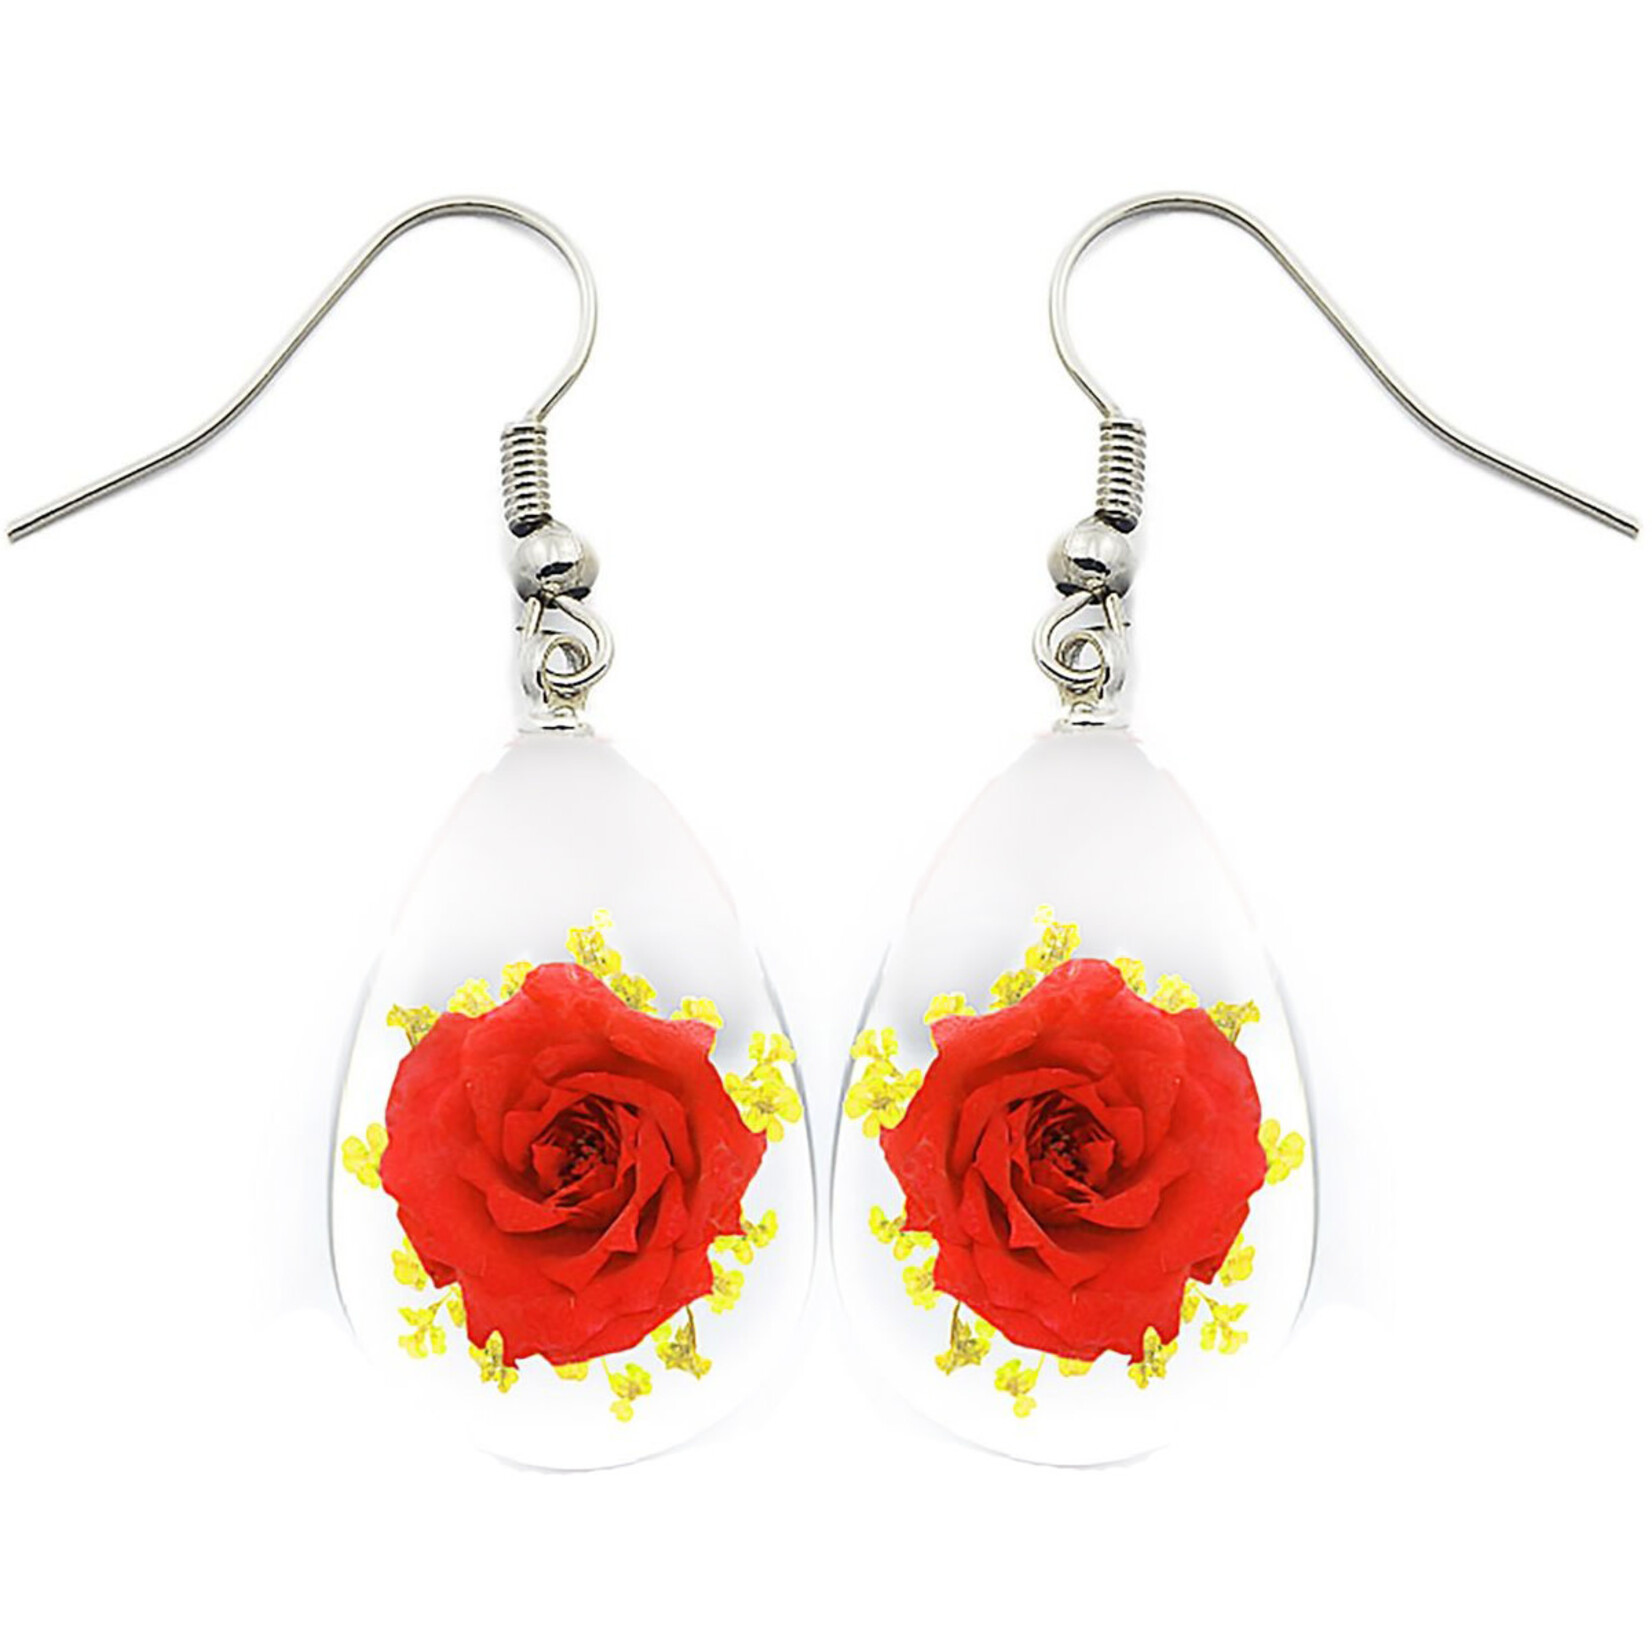 BicBugs Real Preserved Flower Earrings Clear - Red/Yellow Rose